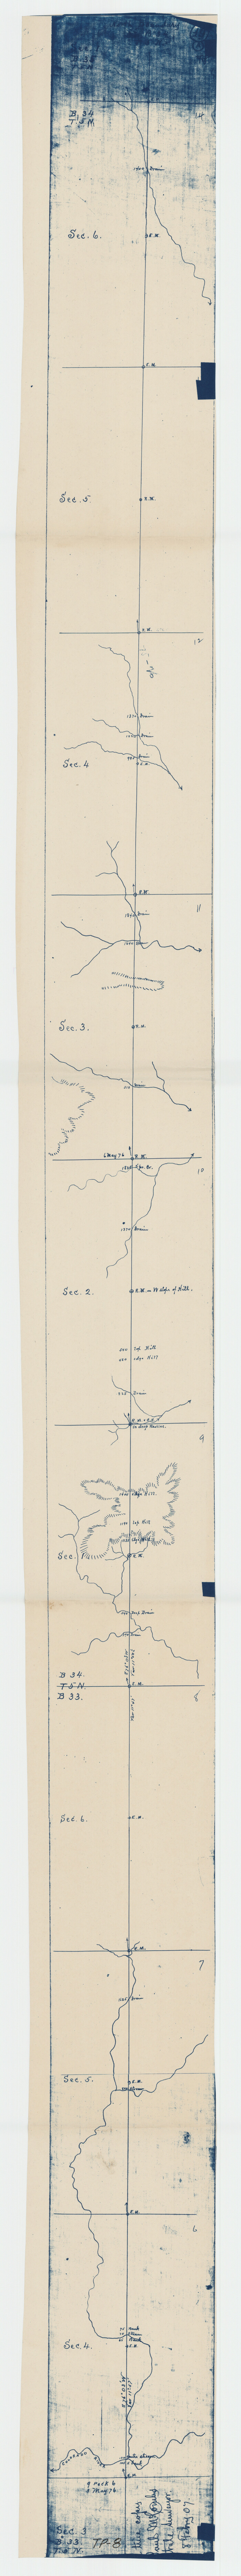 93174, [Strip map showing T. & P. Connecting line from northwest corner Sec.  3, Blk. 33 T5N to northwest corner Sec. 6, Blk. 34 T5N], Twichell Survey Records